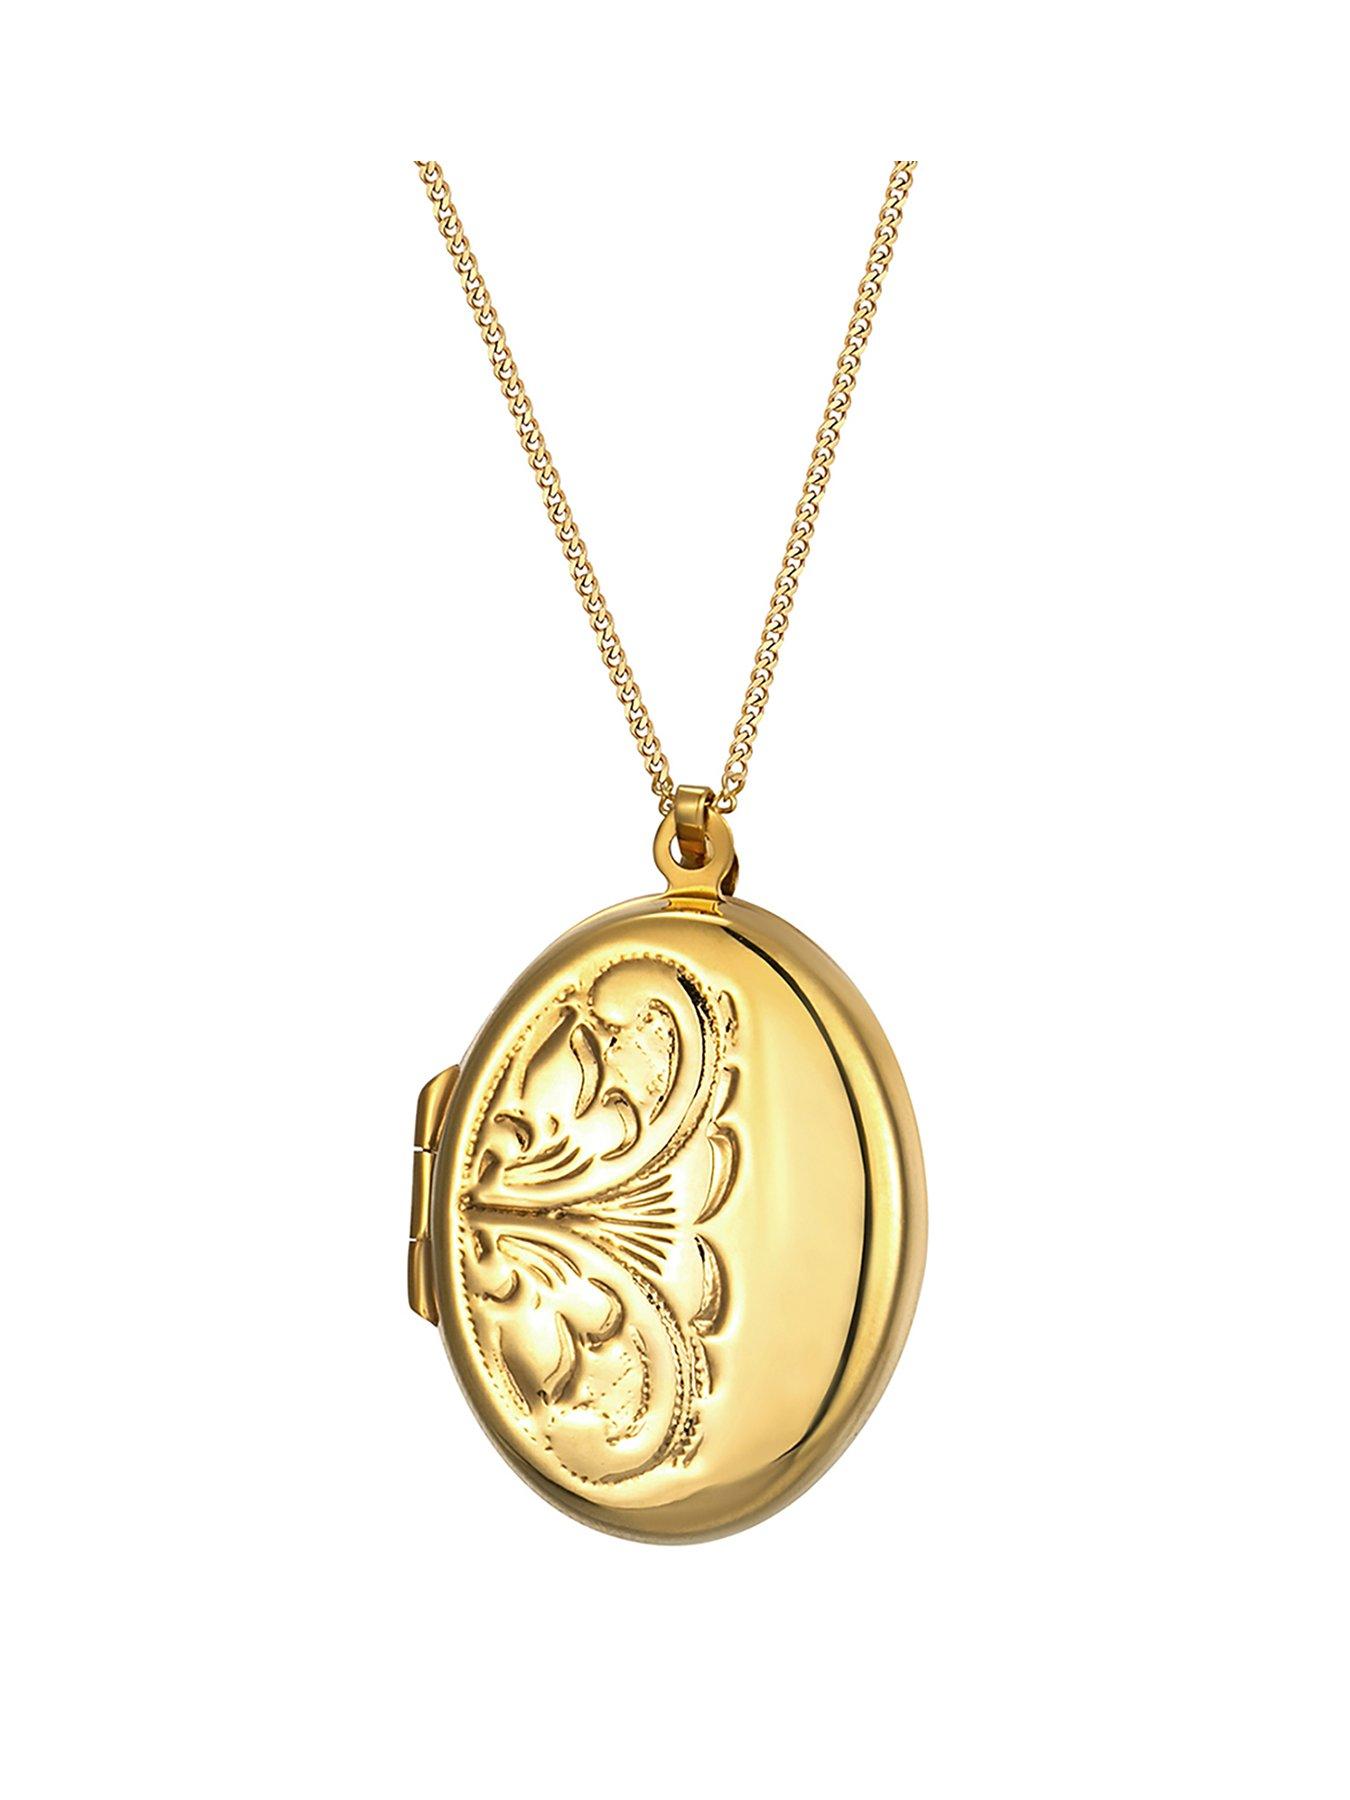  9ct Rolled Gold Oval Locket Pendant Necklace